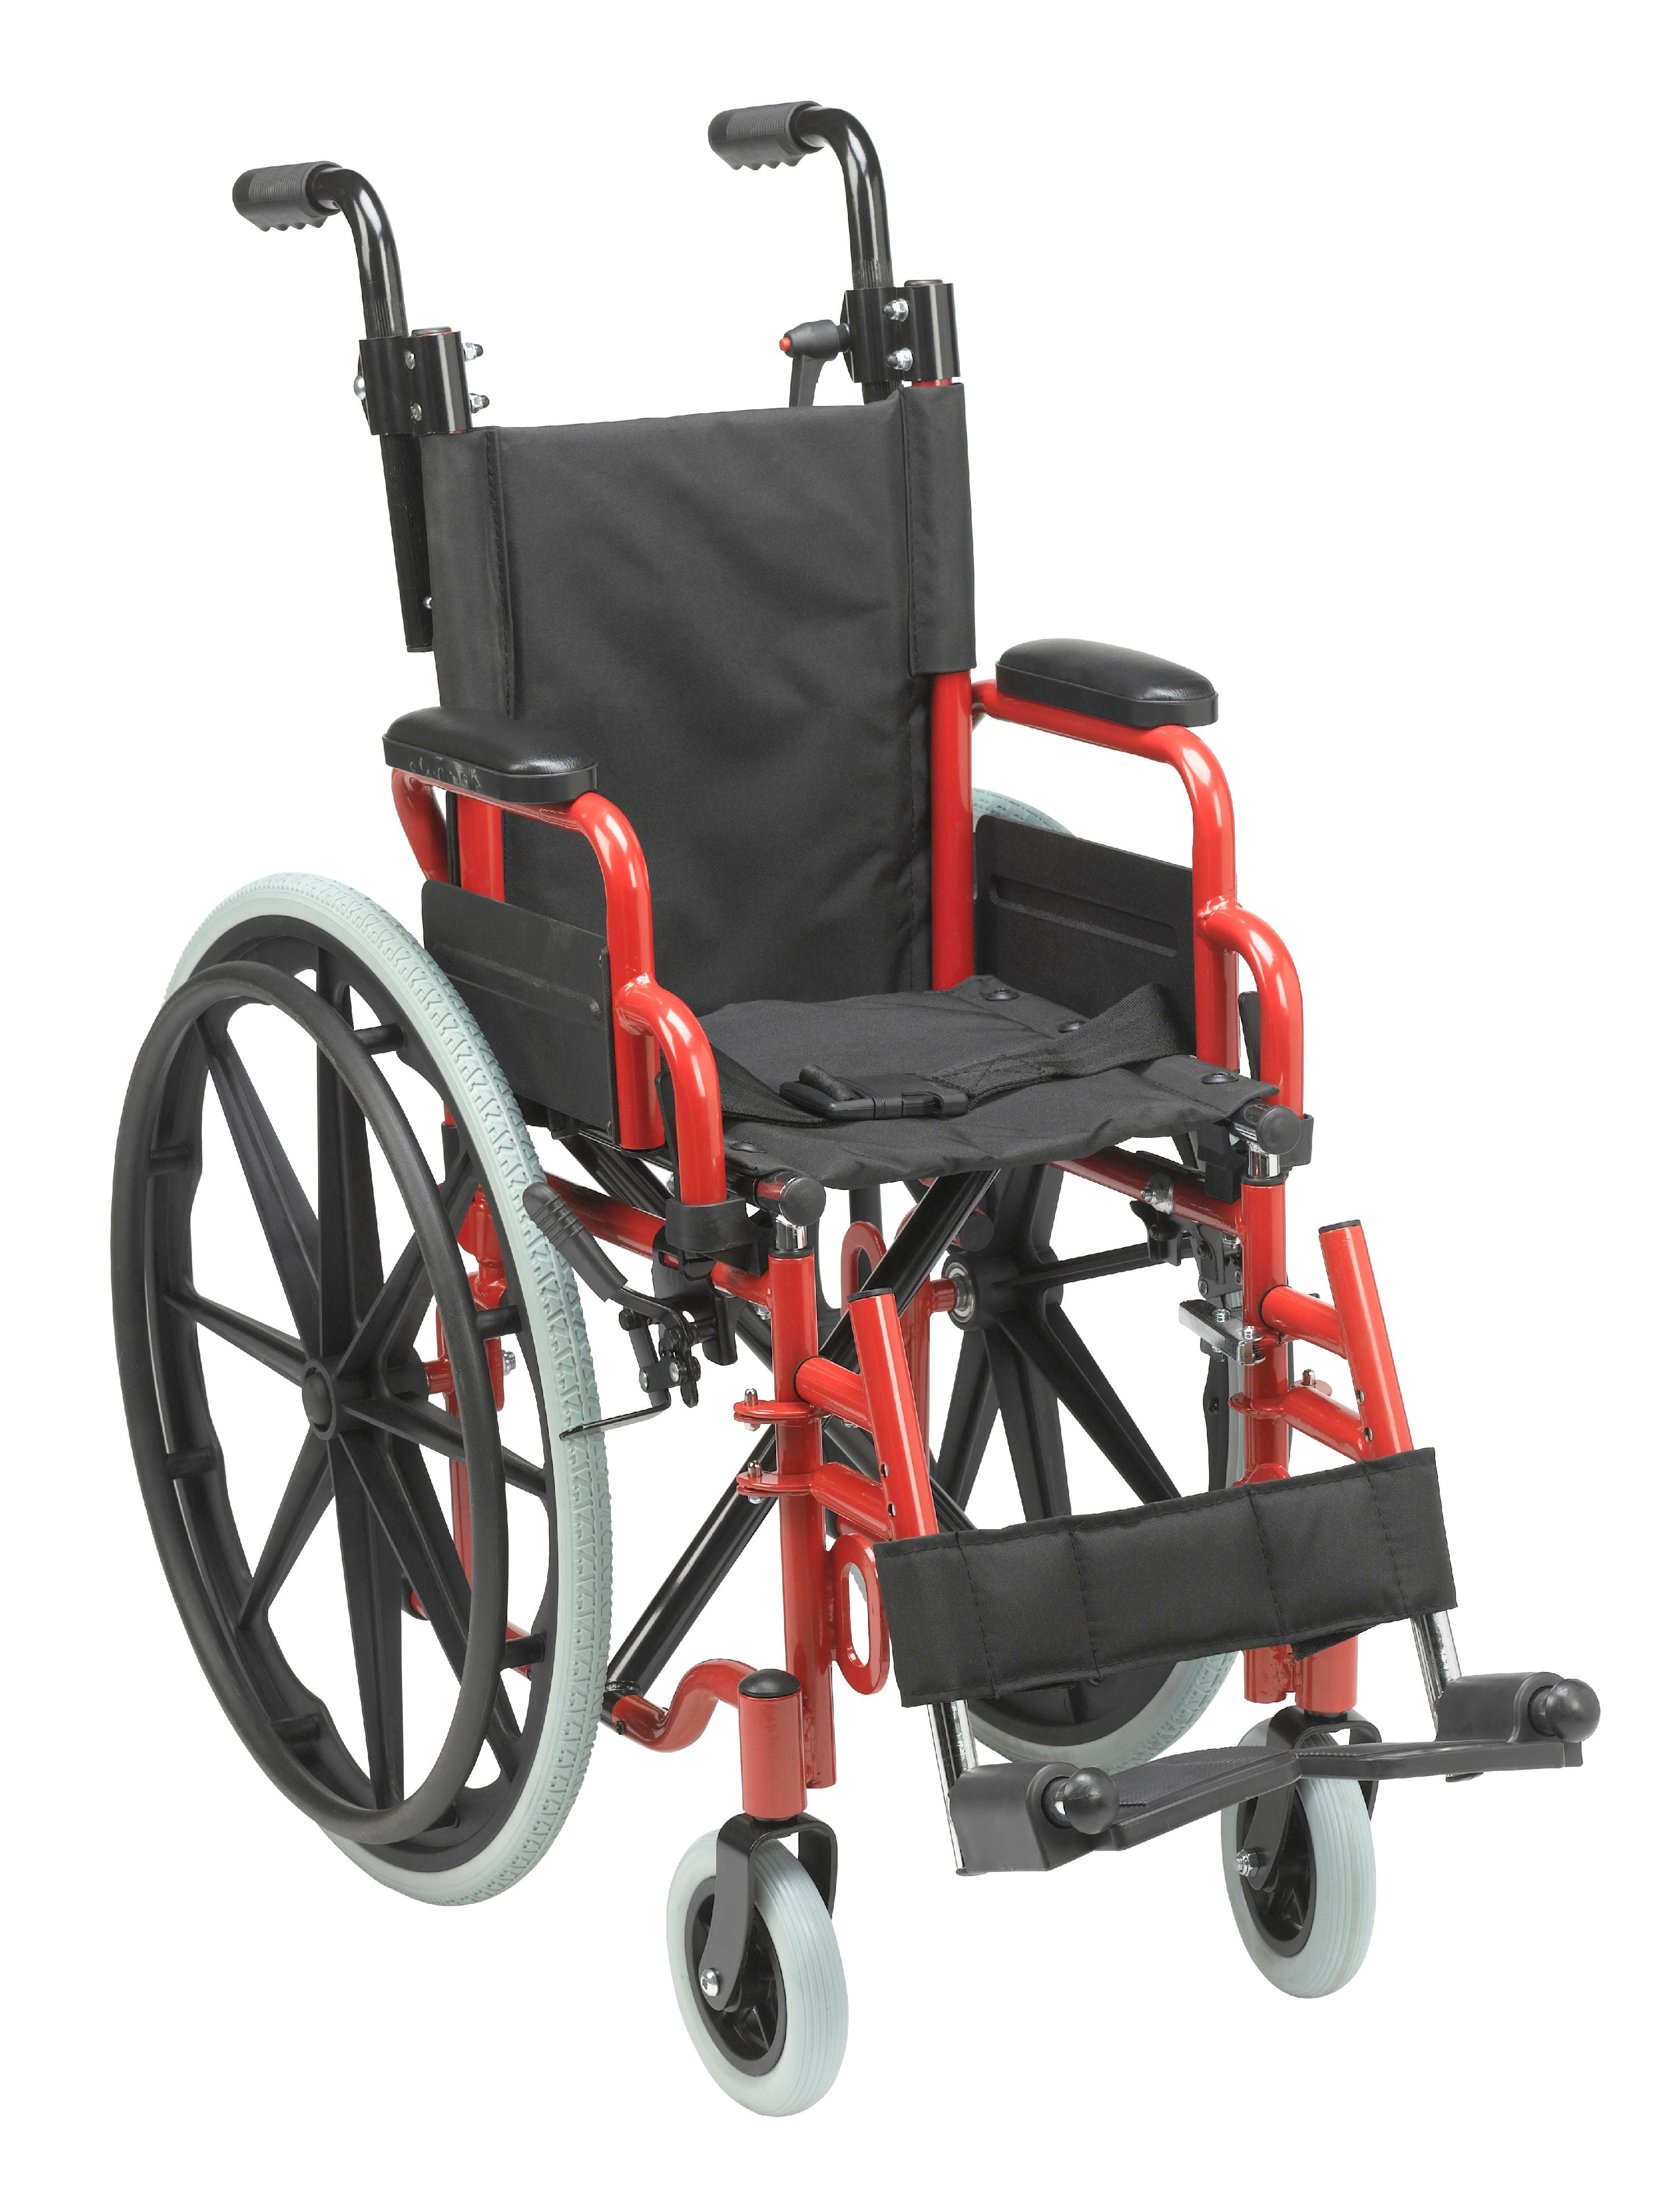 12 In. Wallaby Pediatric Folding Wheelchair, Fire Truck Red